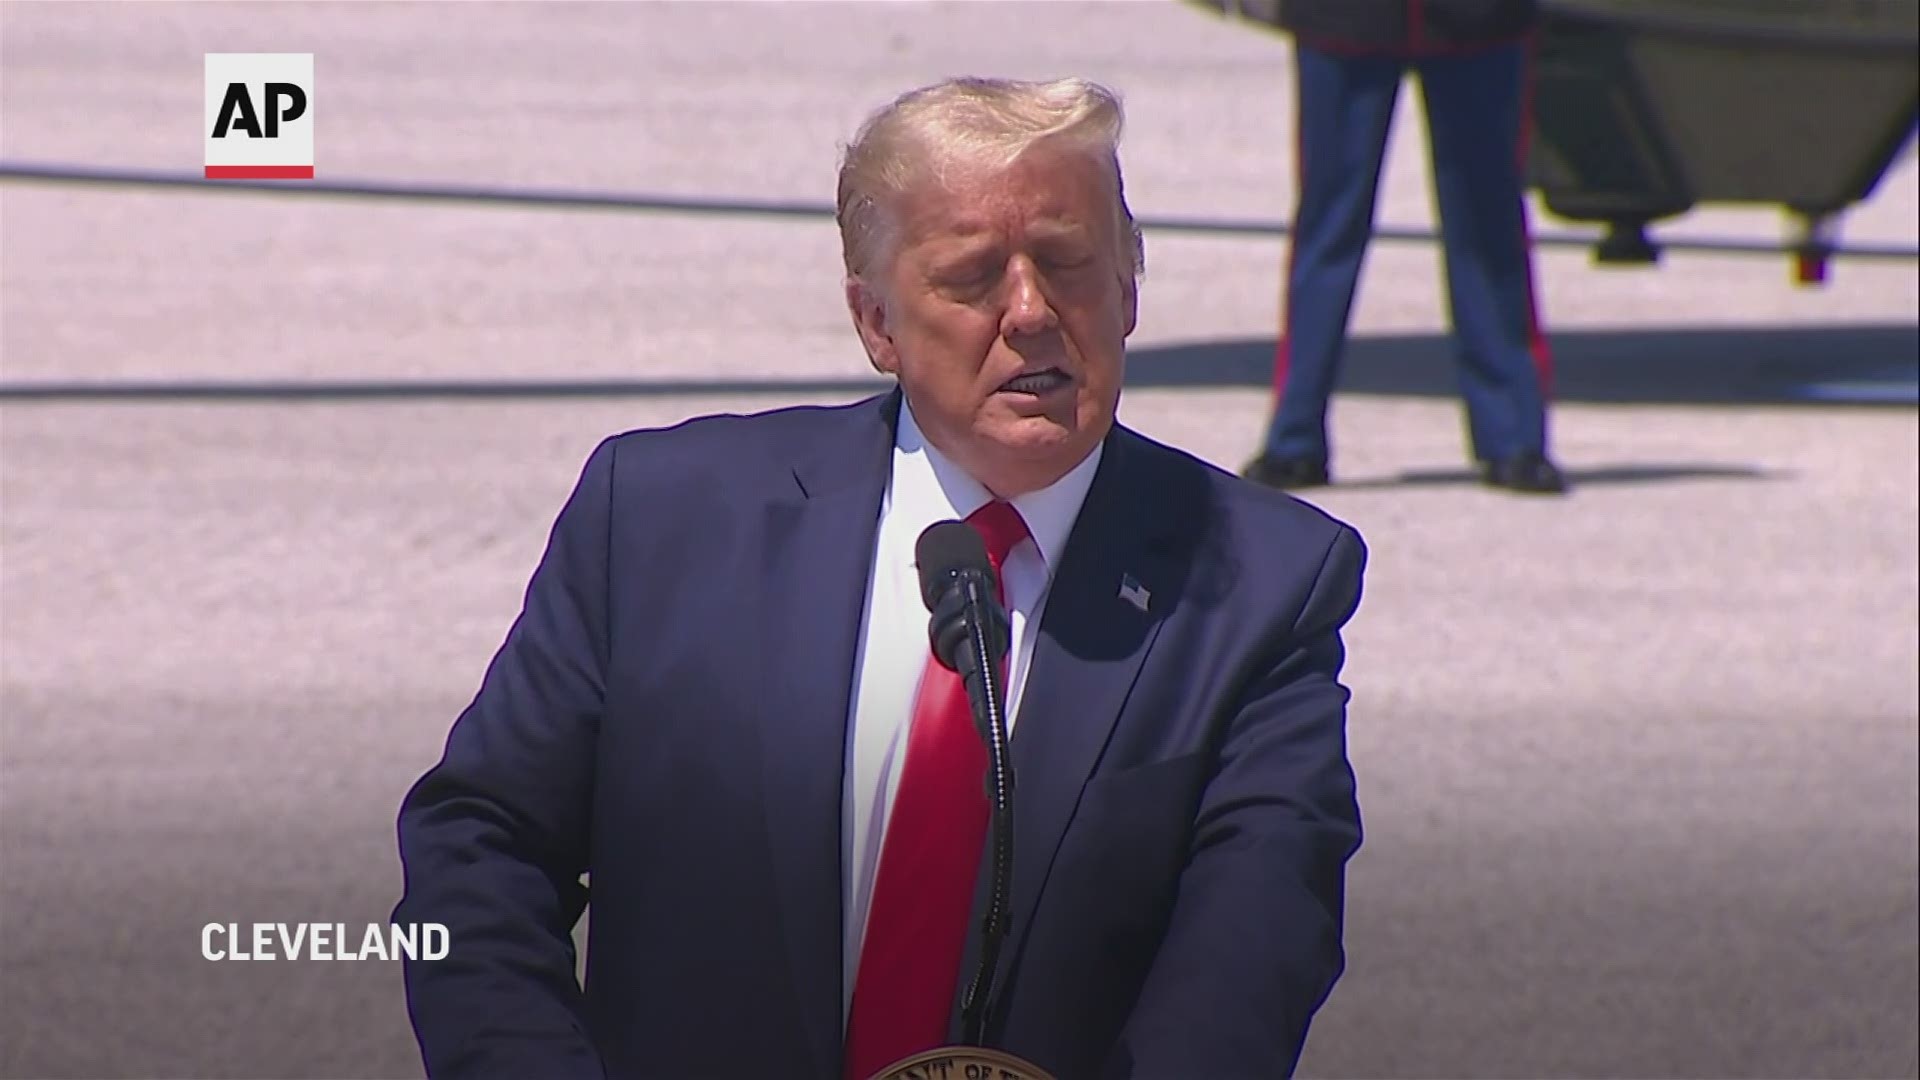 In campaign-style remarks as he landed in Ohio, President Donald Trump said his opponent, Joe Biden, a lifelong Catholic, "is against God" and will "hurt the Bible."